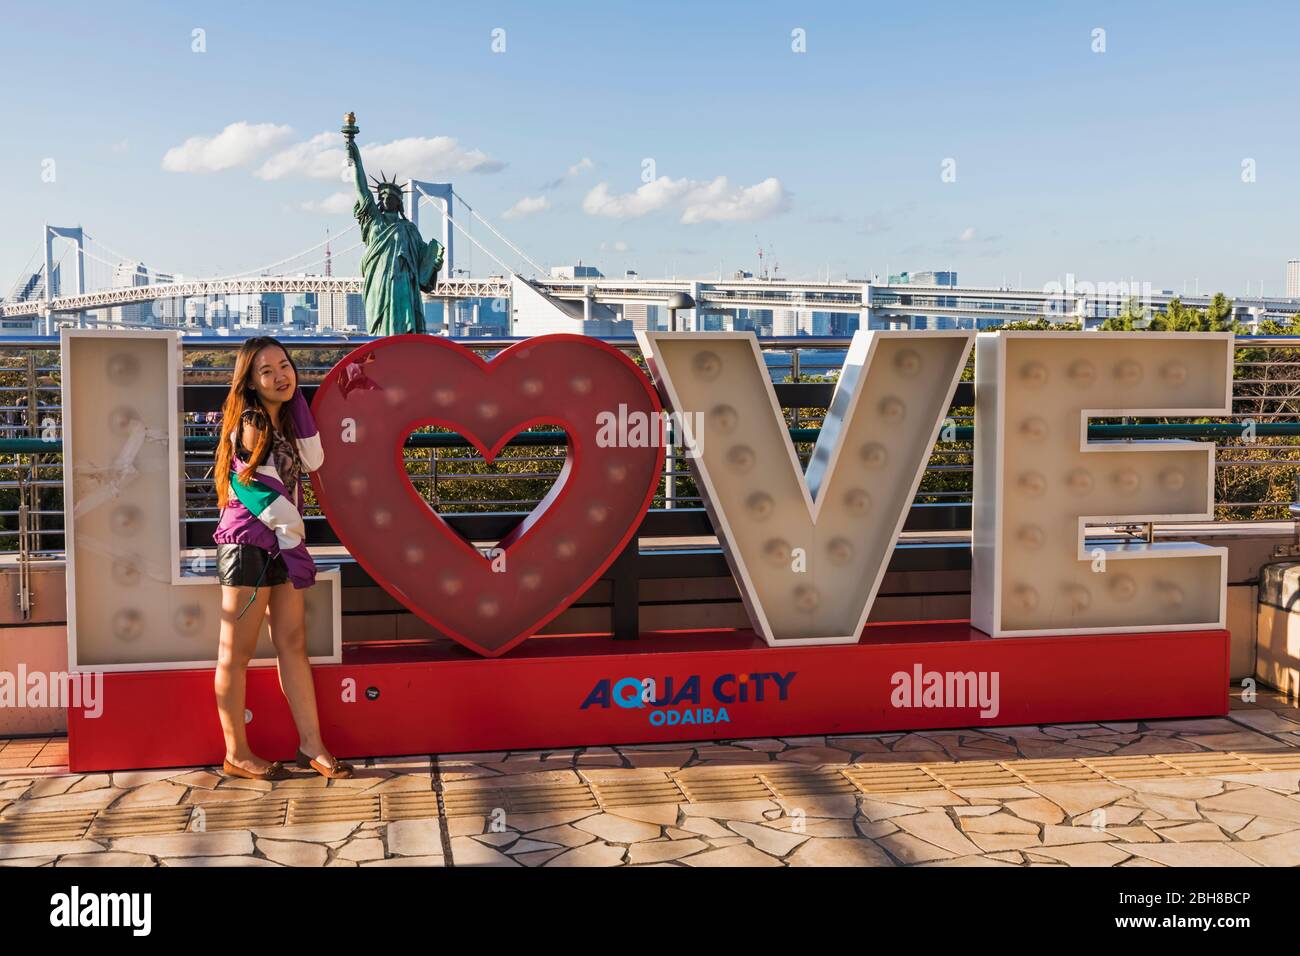 Le Japon, Honshu, Tokyo, Tokyo, Odaiba, Waterfront City Girl posing with Love Sign Banque D'Images